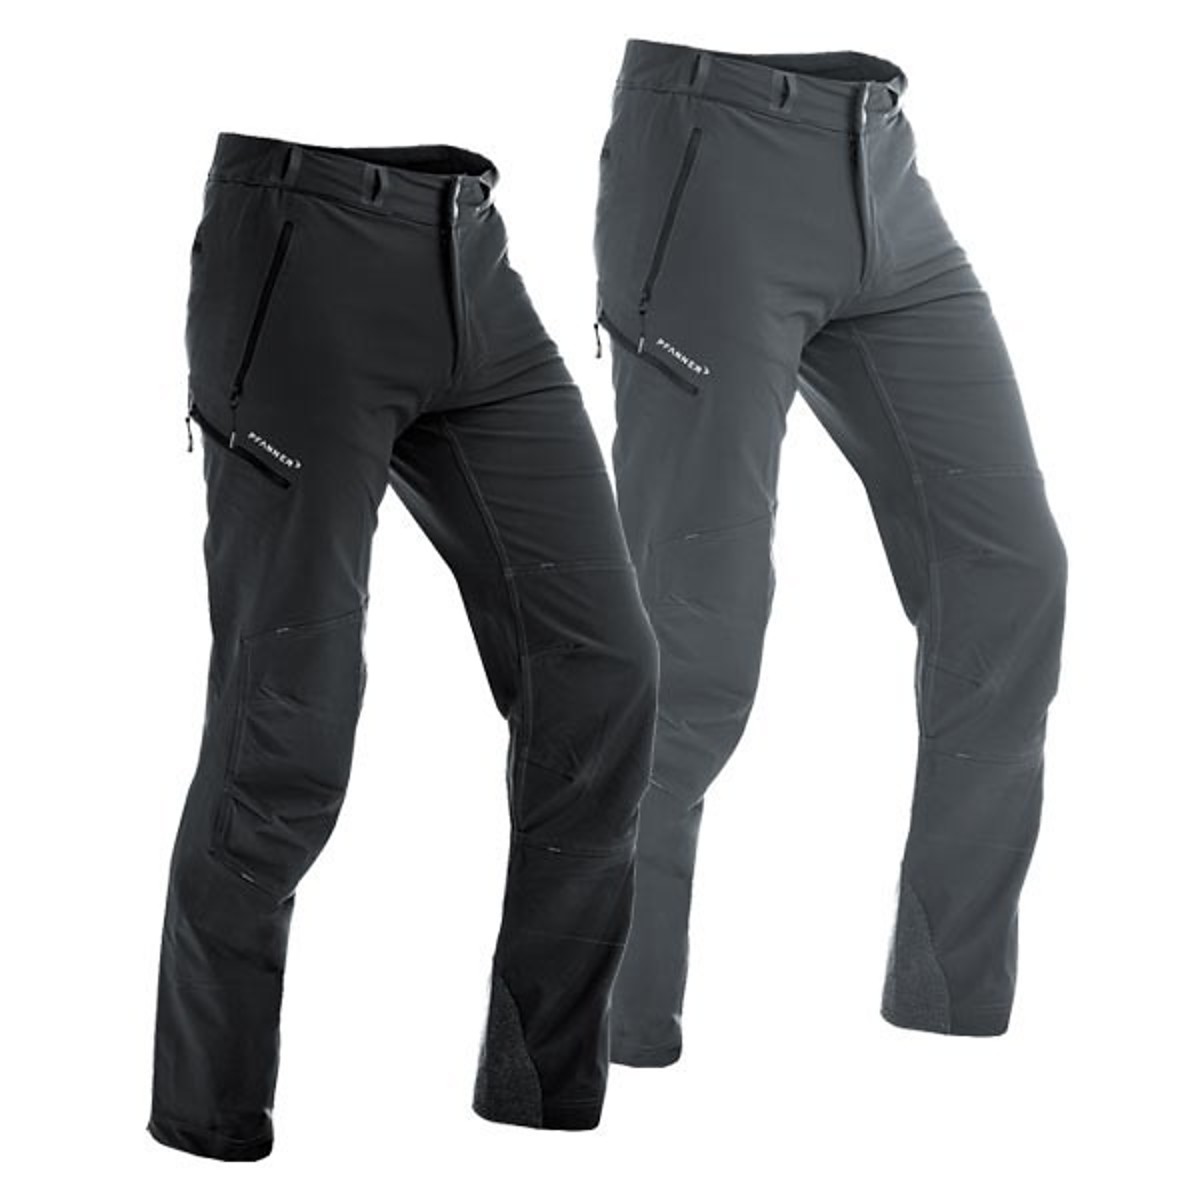 Pfanner Concept Outdoorhose - 1